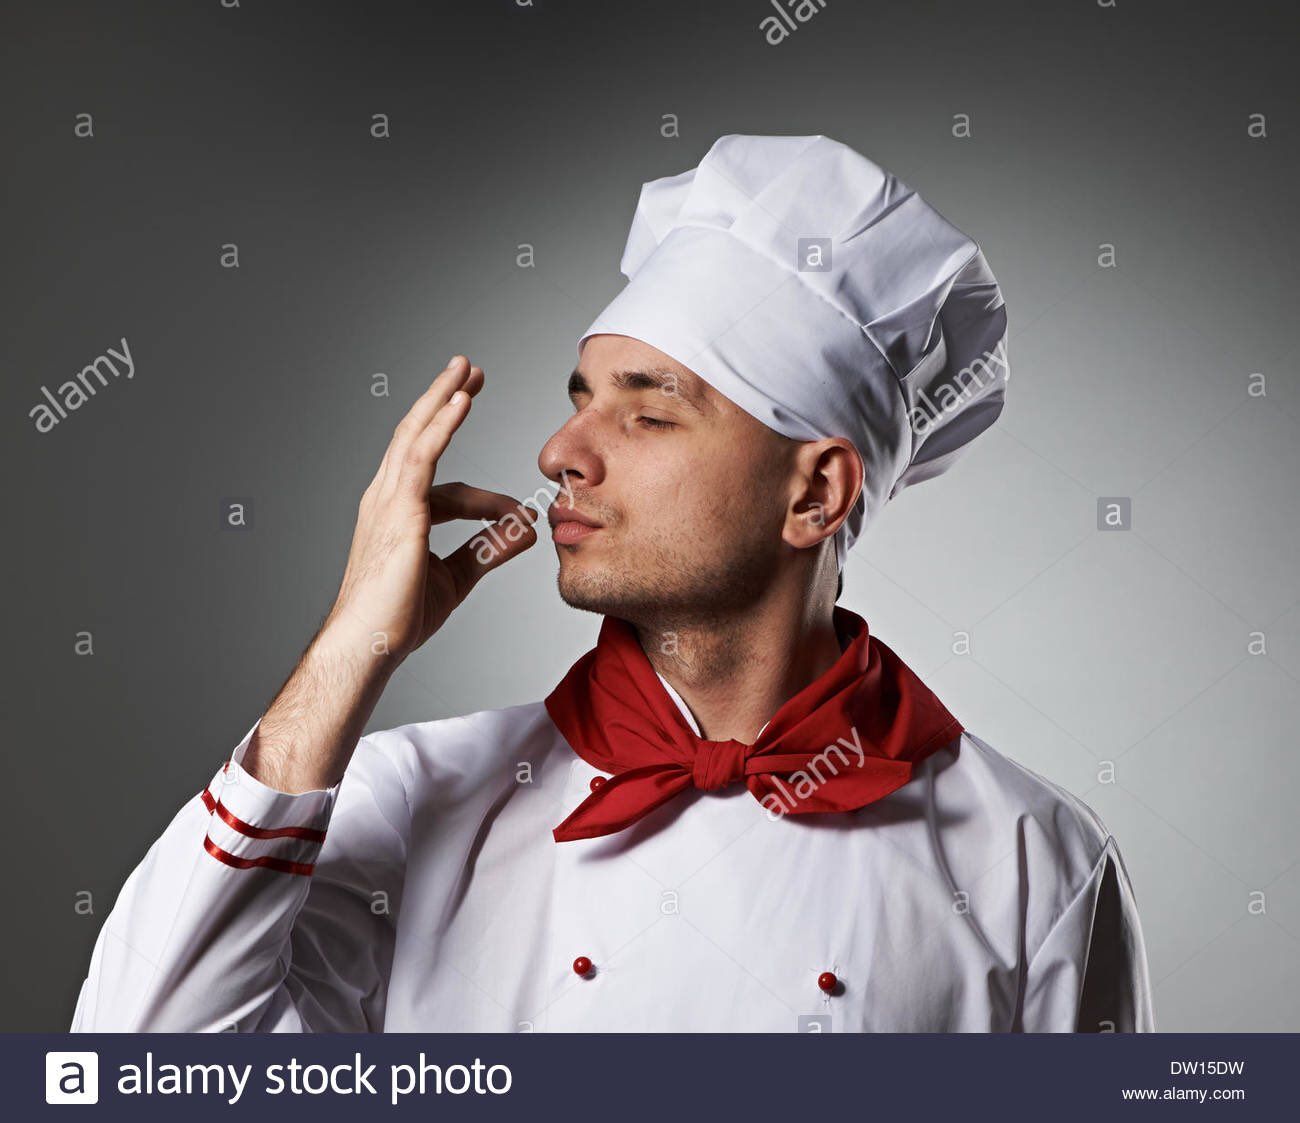 another chef